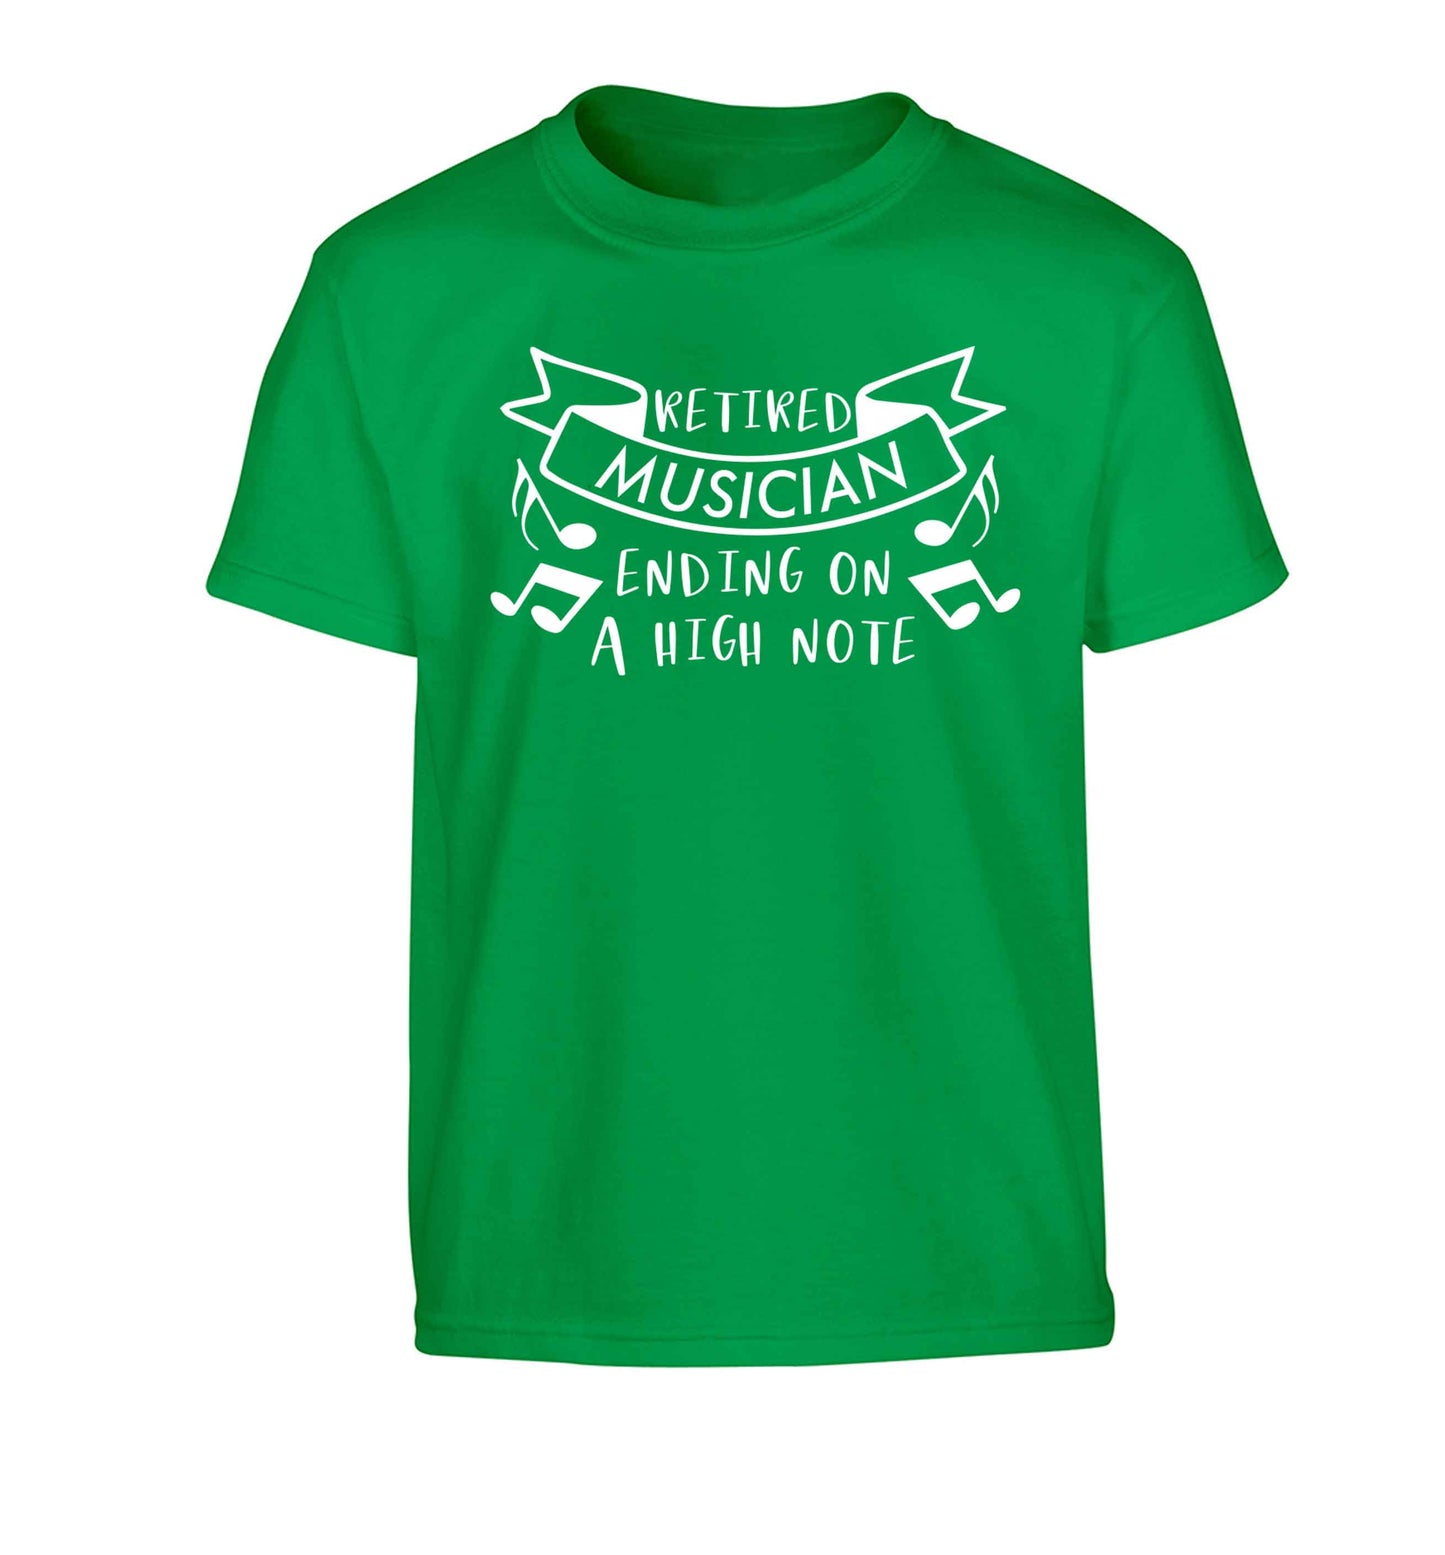 Retired musician ending on a high note Children's green Tshirt 12-13 Years